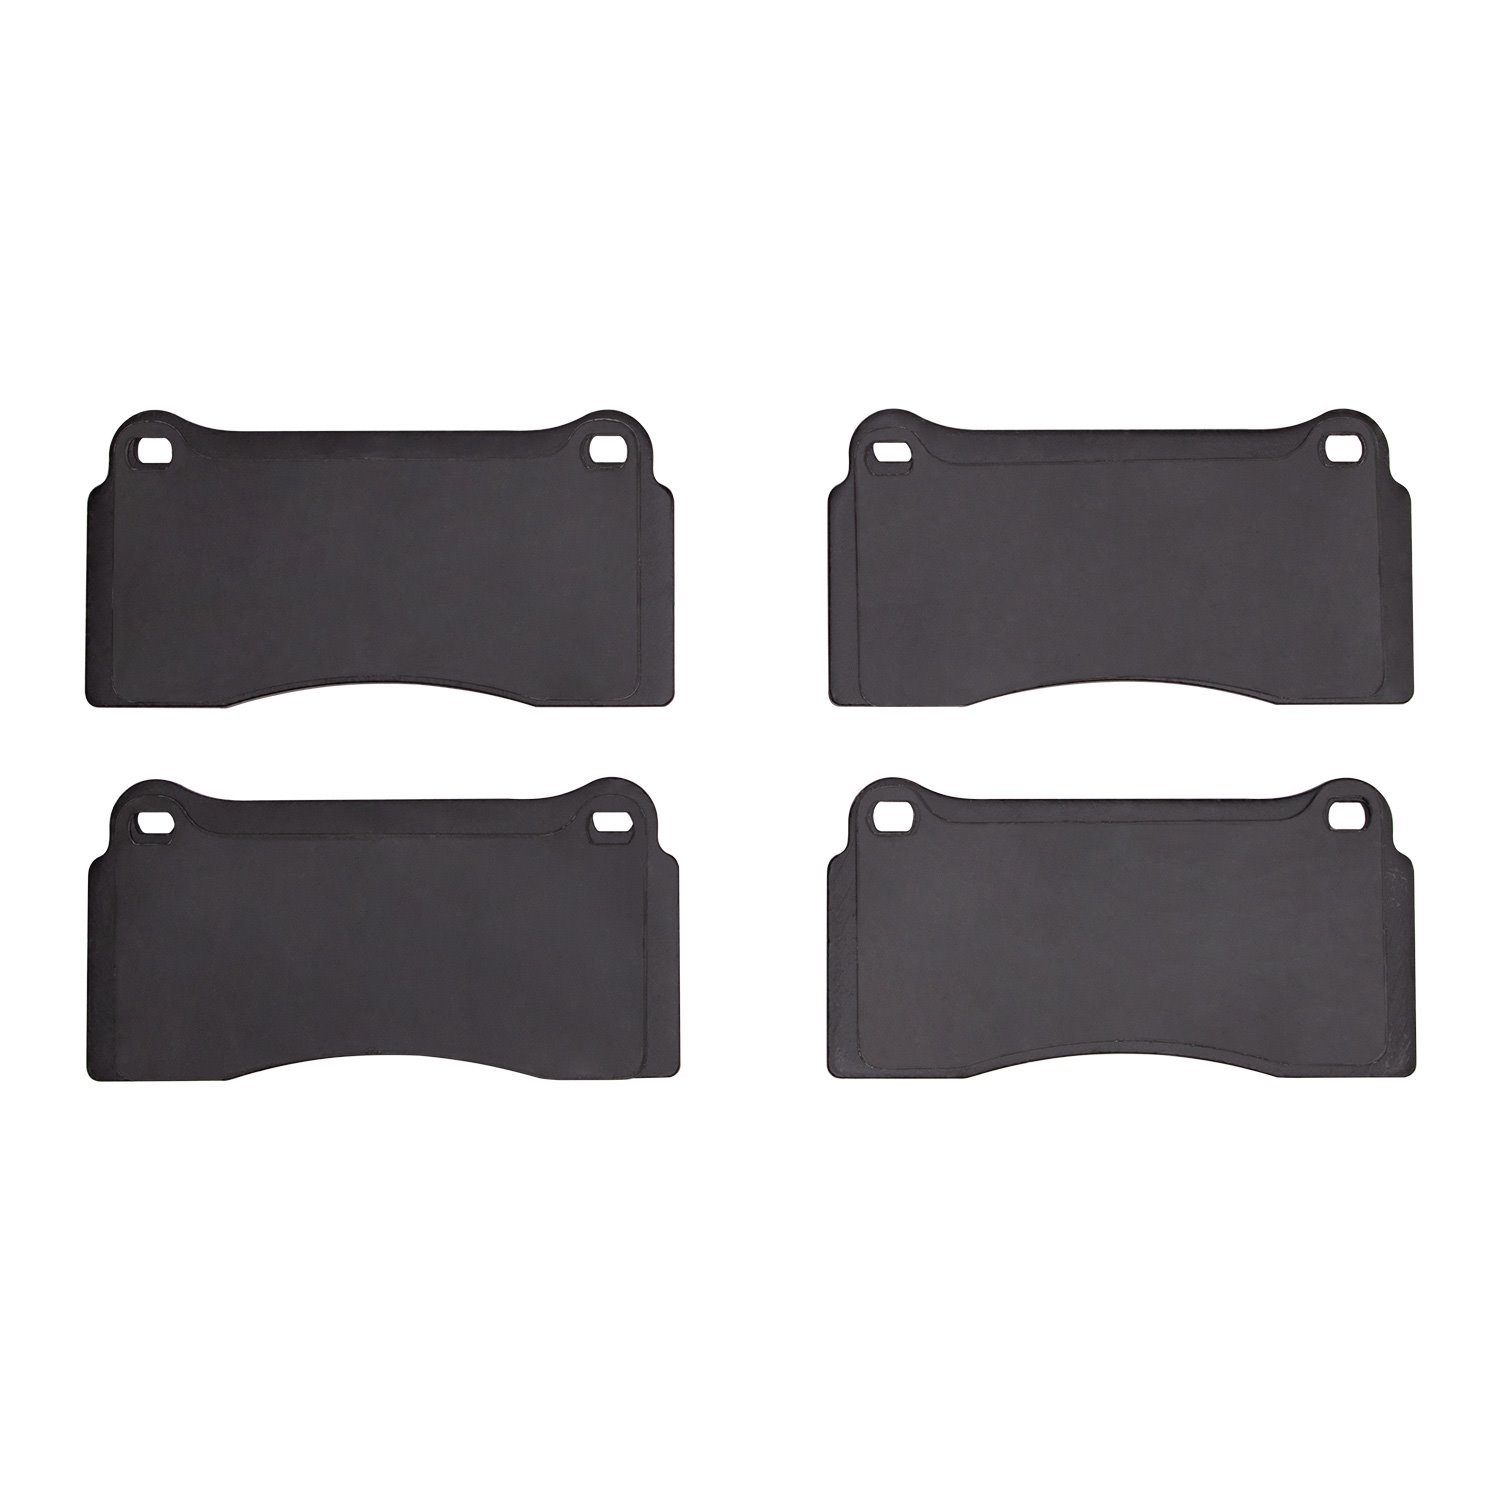 1551-0810-00 5000 Advanced Low-Metallic Brake Pads, 1990-2006 Multiple Makes/Models, Position: Front,Rear